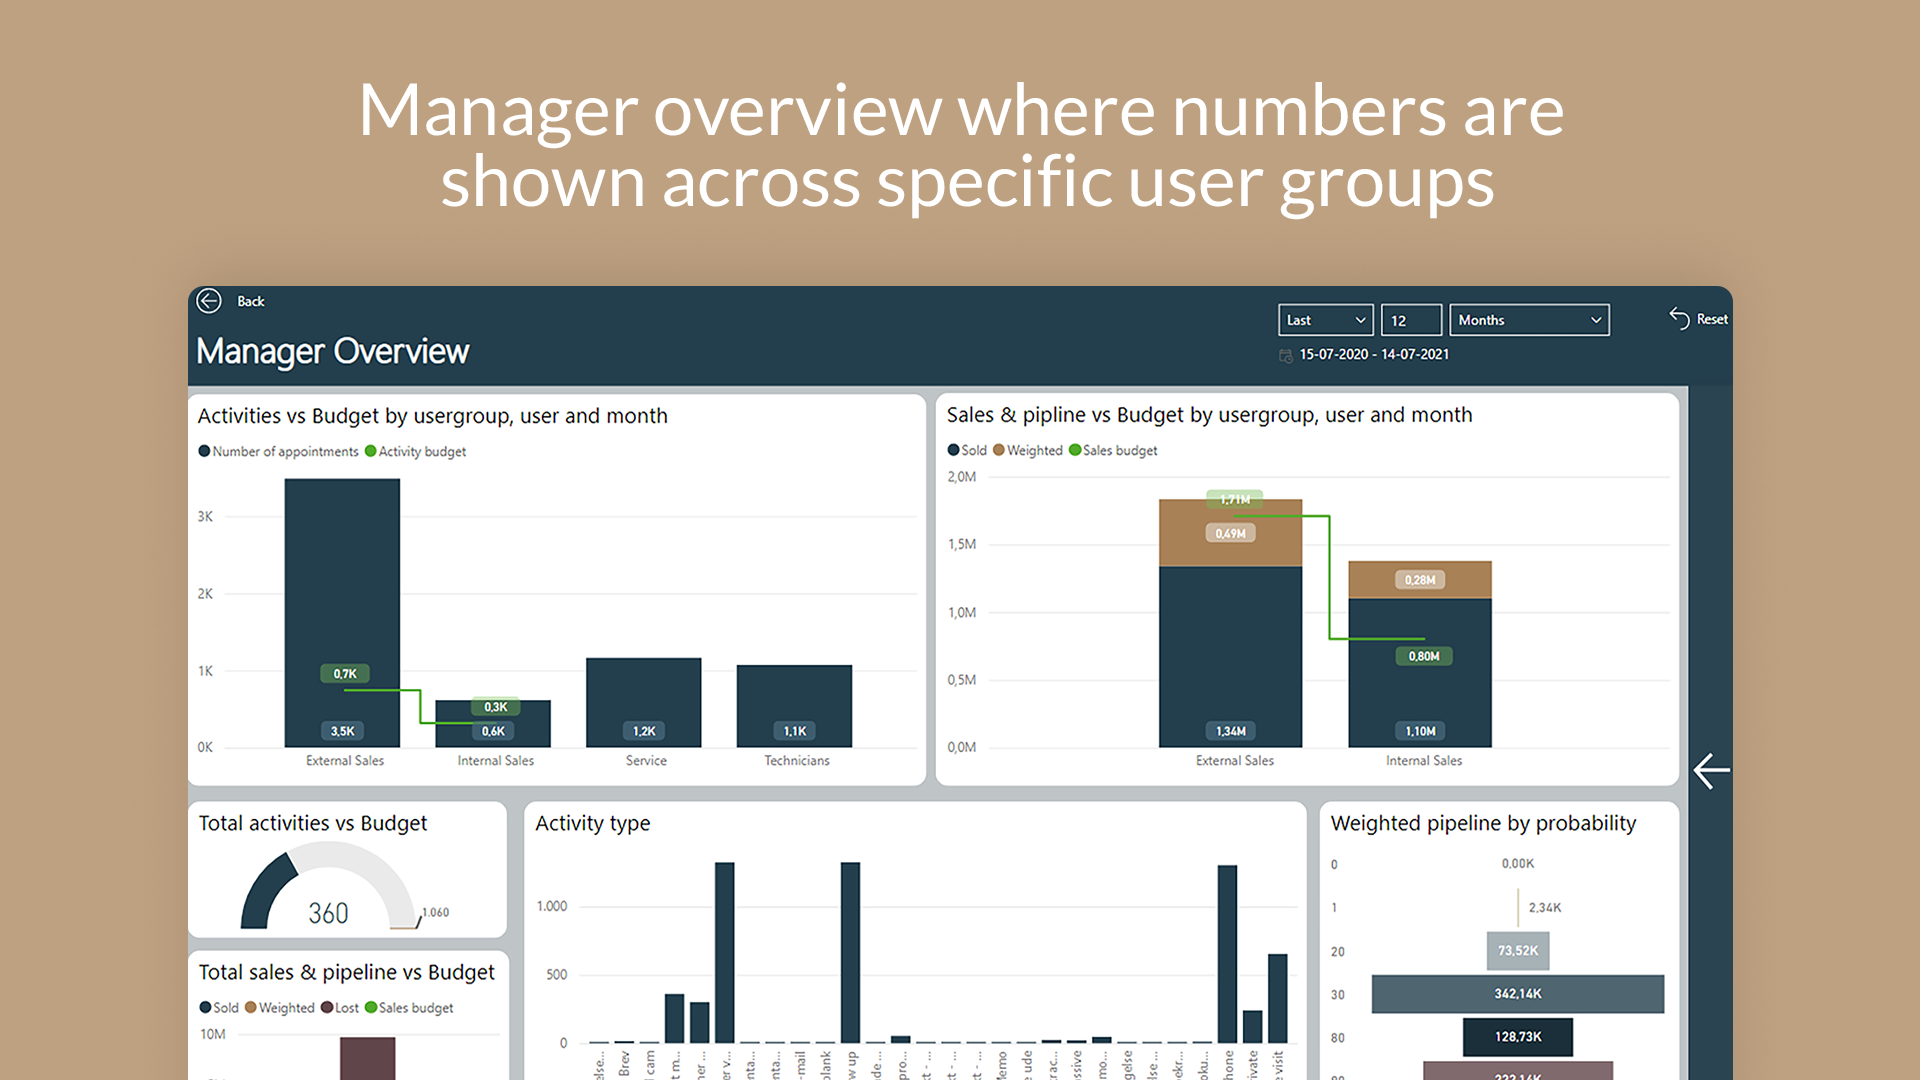 Manager overview where numbers are shown across specific user groups